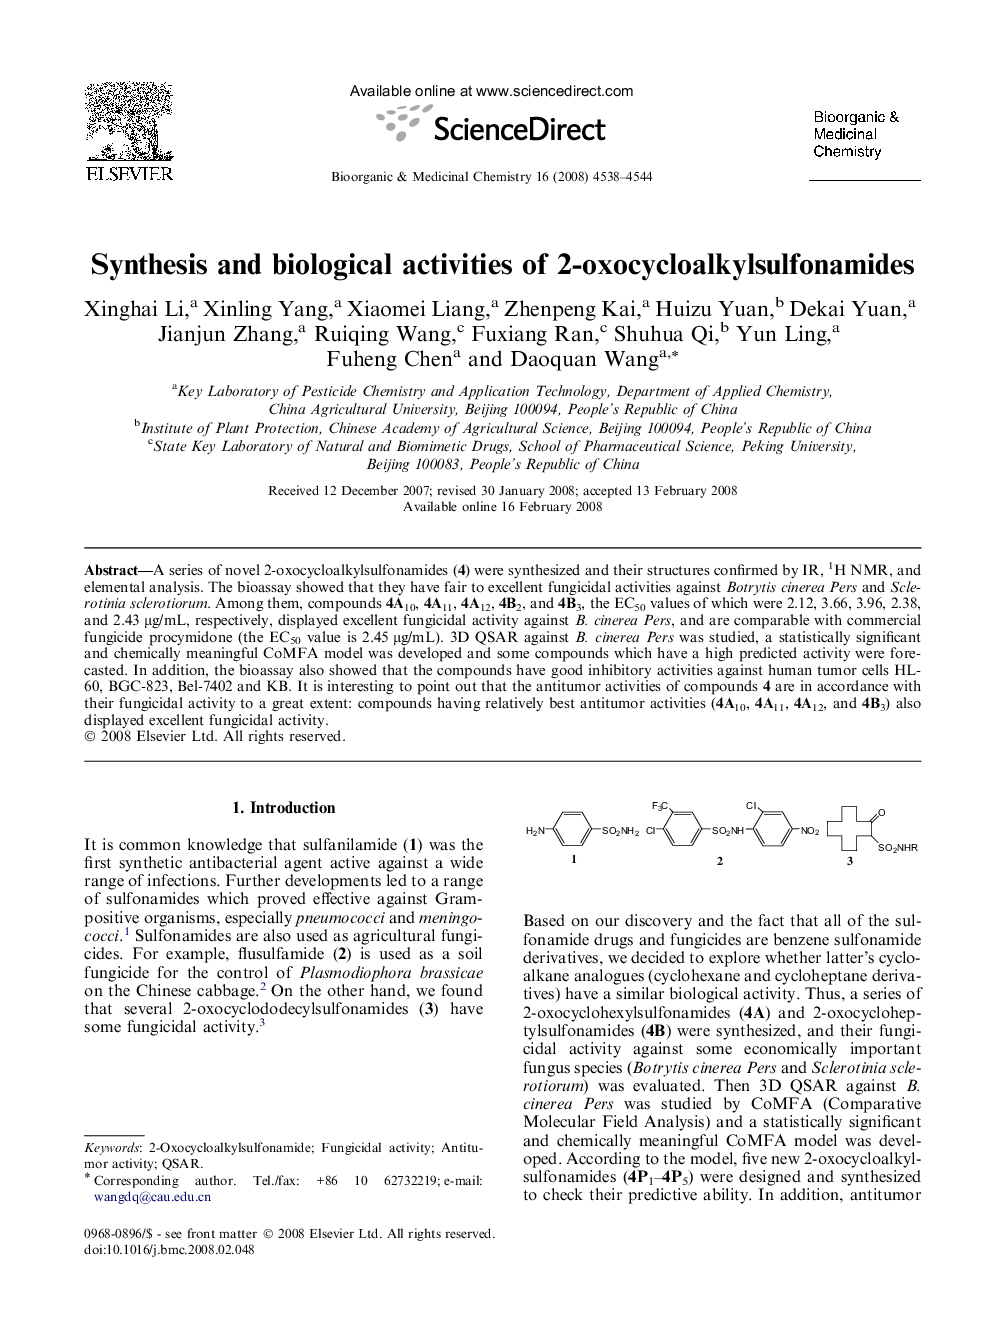 Synthesis and biological activities of 2-oxocycloalkylsulfonamides